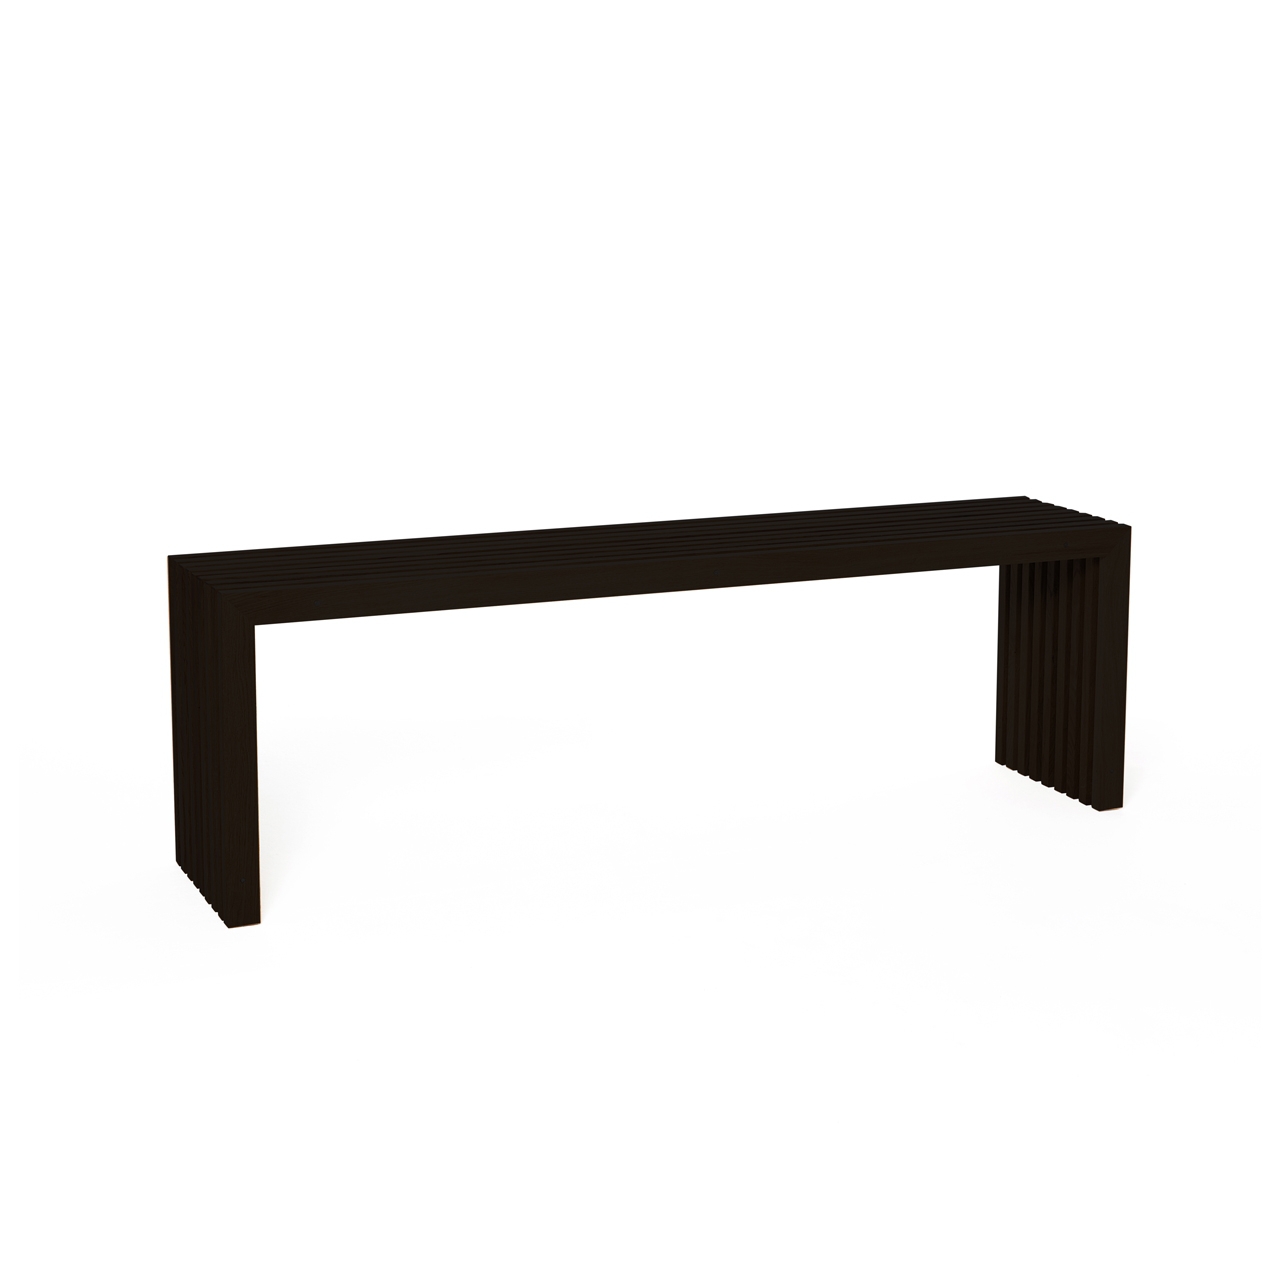 Stool and bench, black